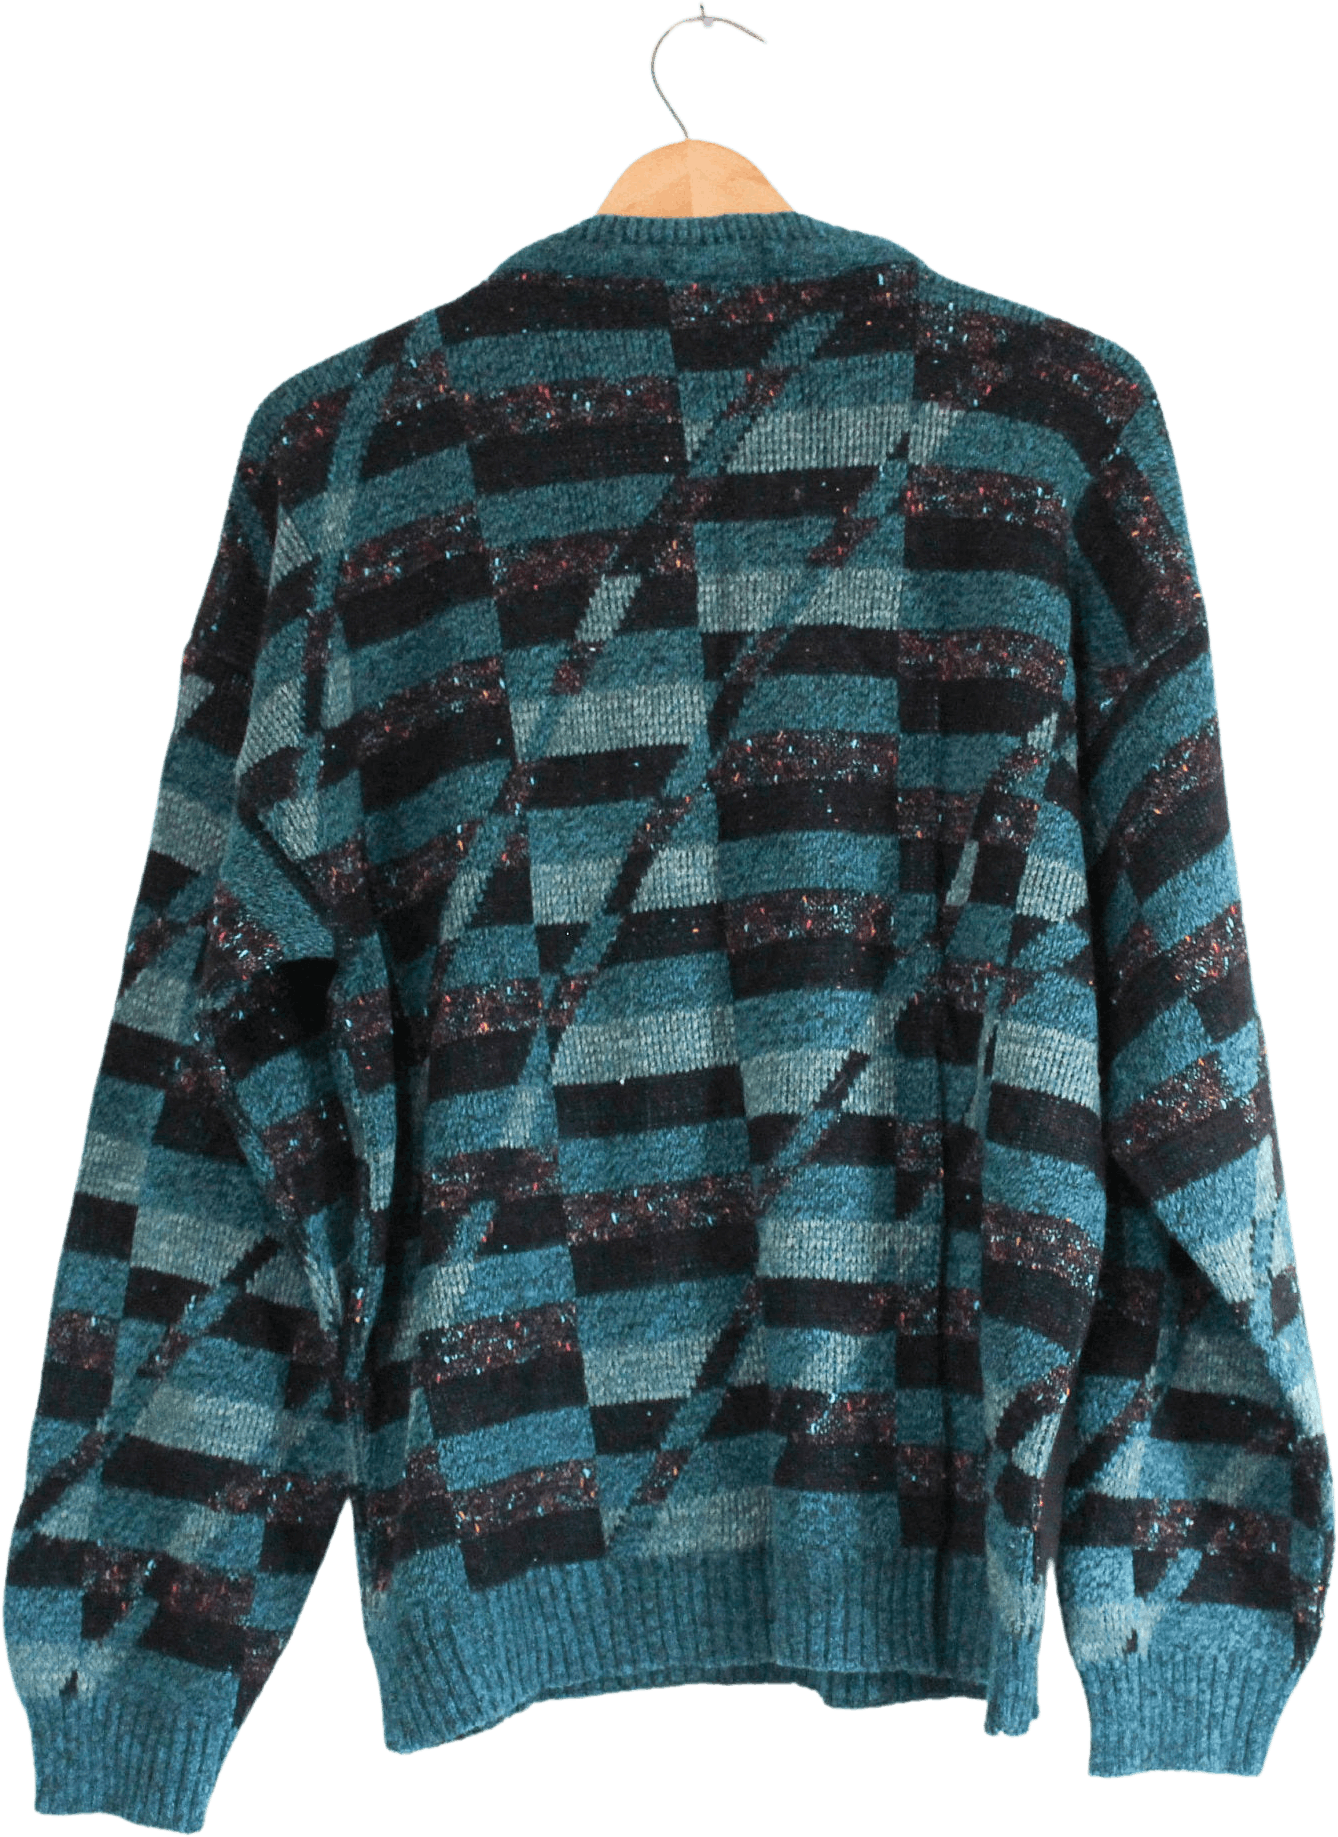 Vintage Green Checkered Graphic Acrylic Sweater by Protege | Shop THRILLING